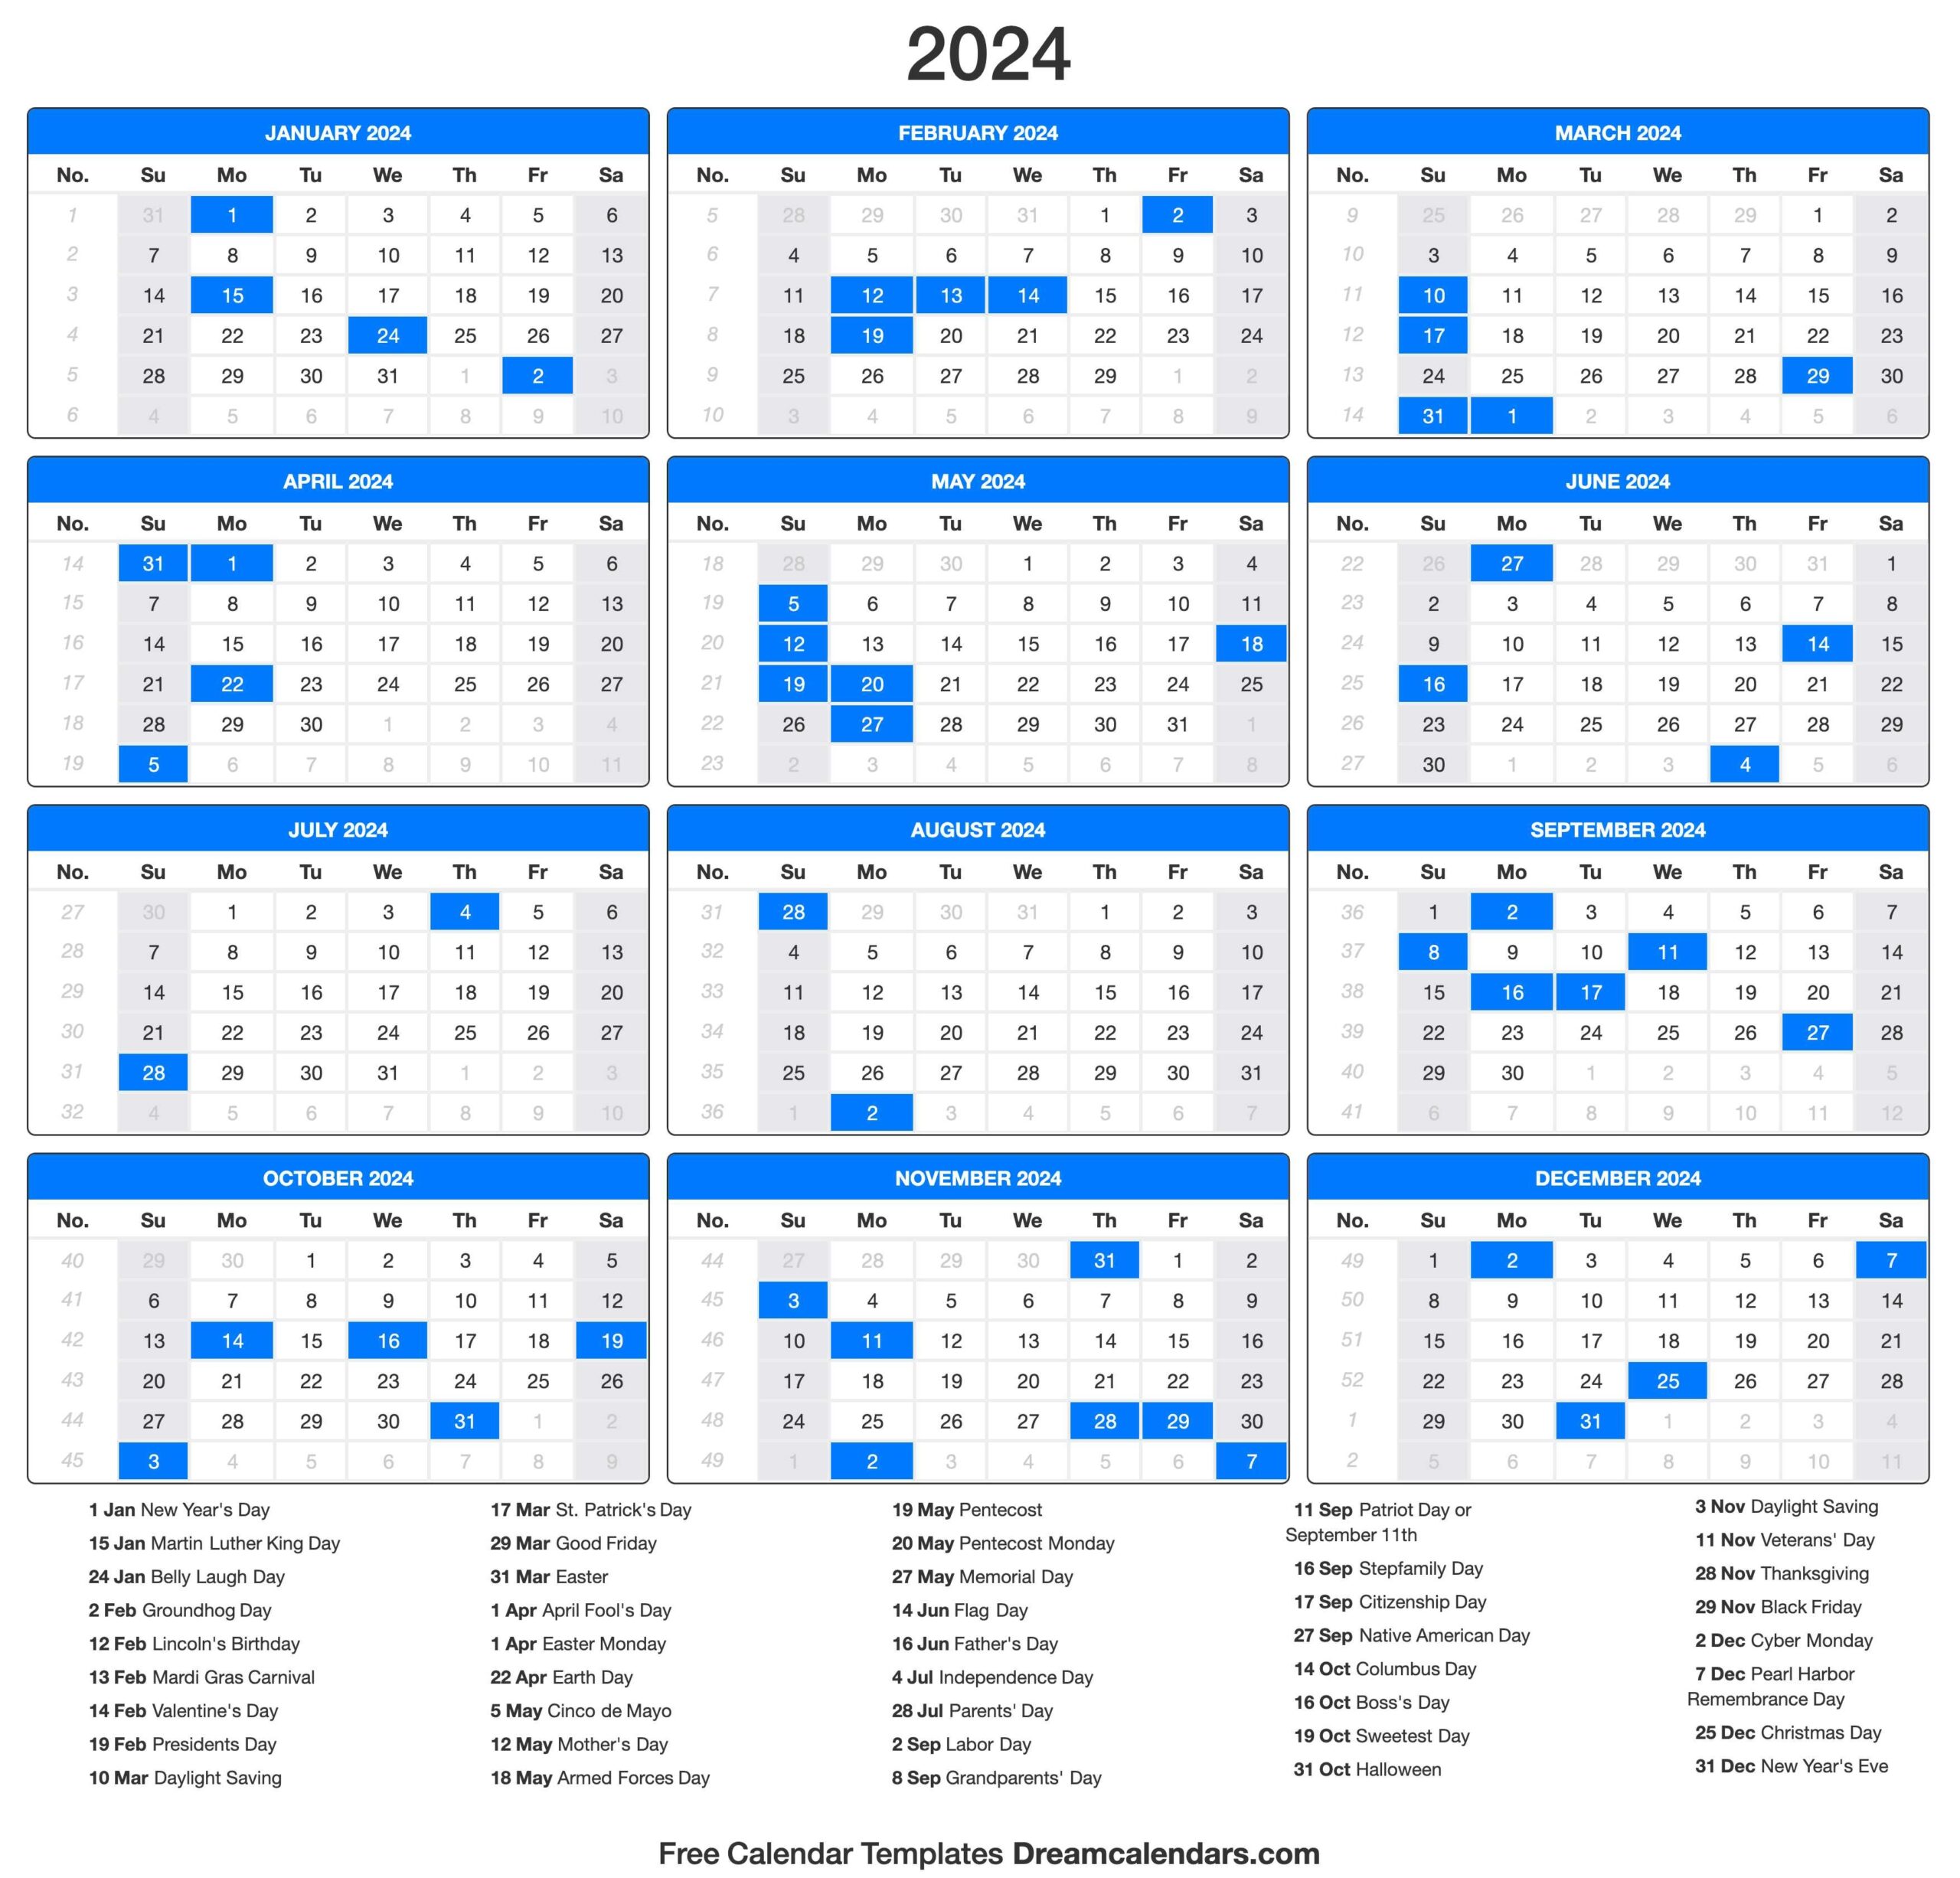 2024 Calendar - Free Printable 2024 Calendar With Holidays By Month